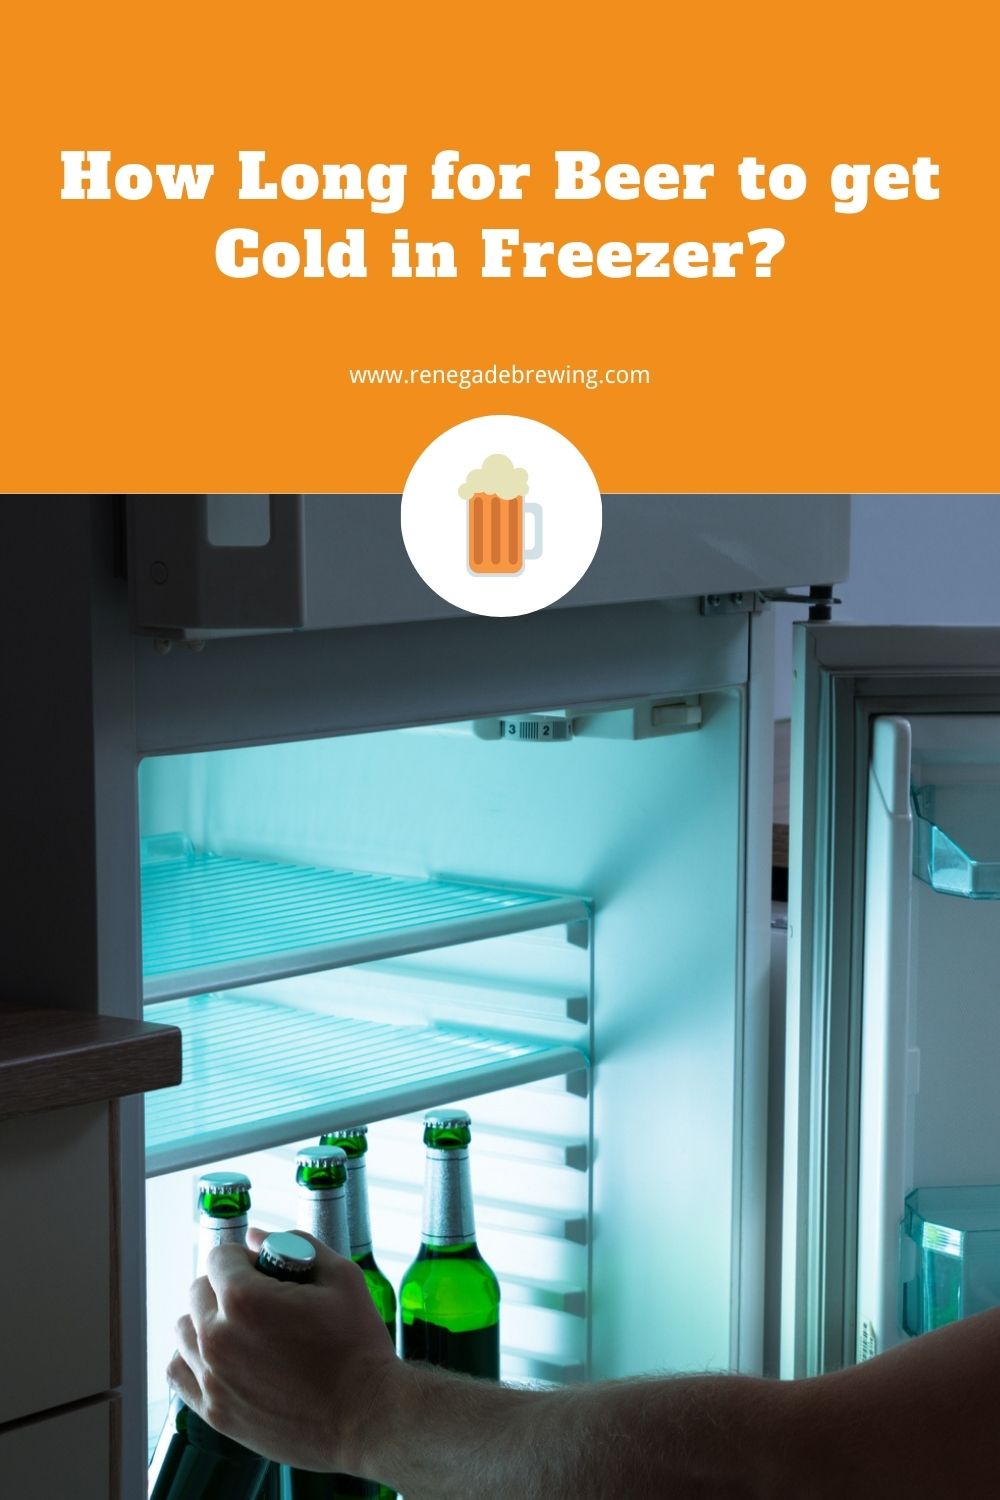 How Long for Beer to get Cold in Freezer (5 Tips to Fast) 1